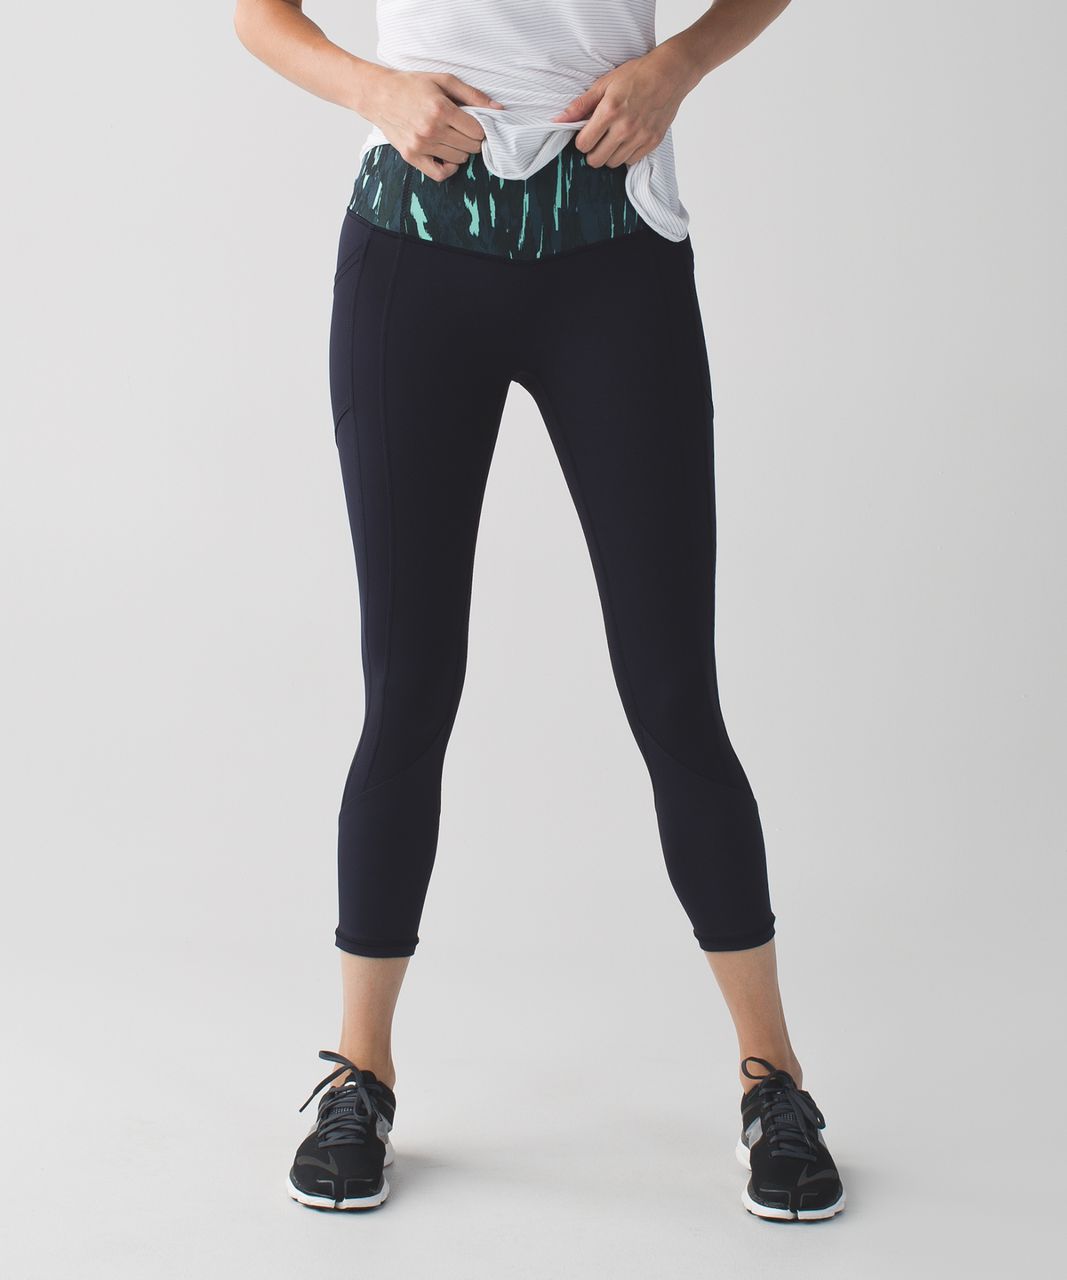 Lululemon All The Right Places Crop - Naval Blue / Painted Animal Menthol Black